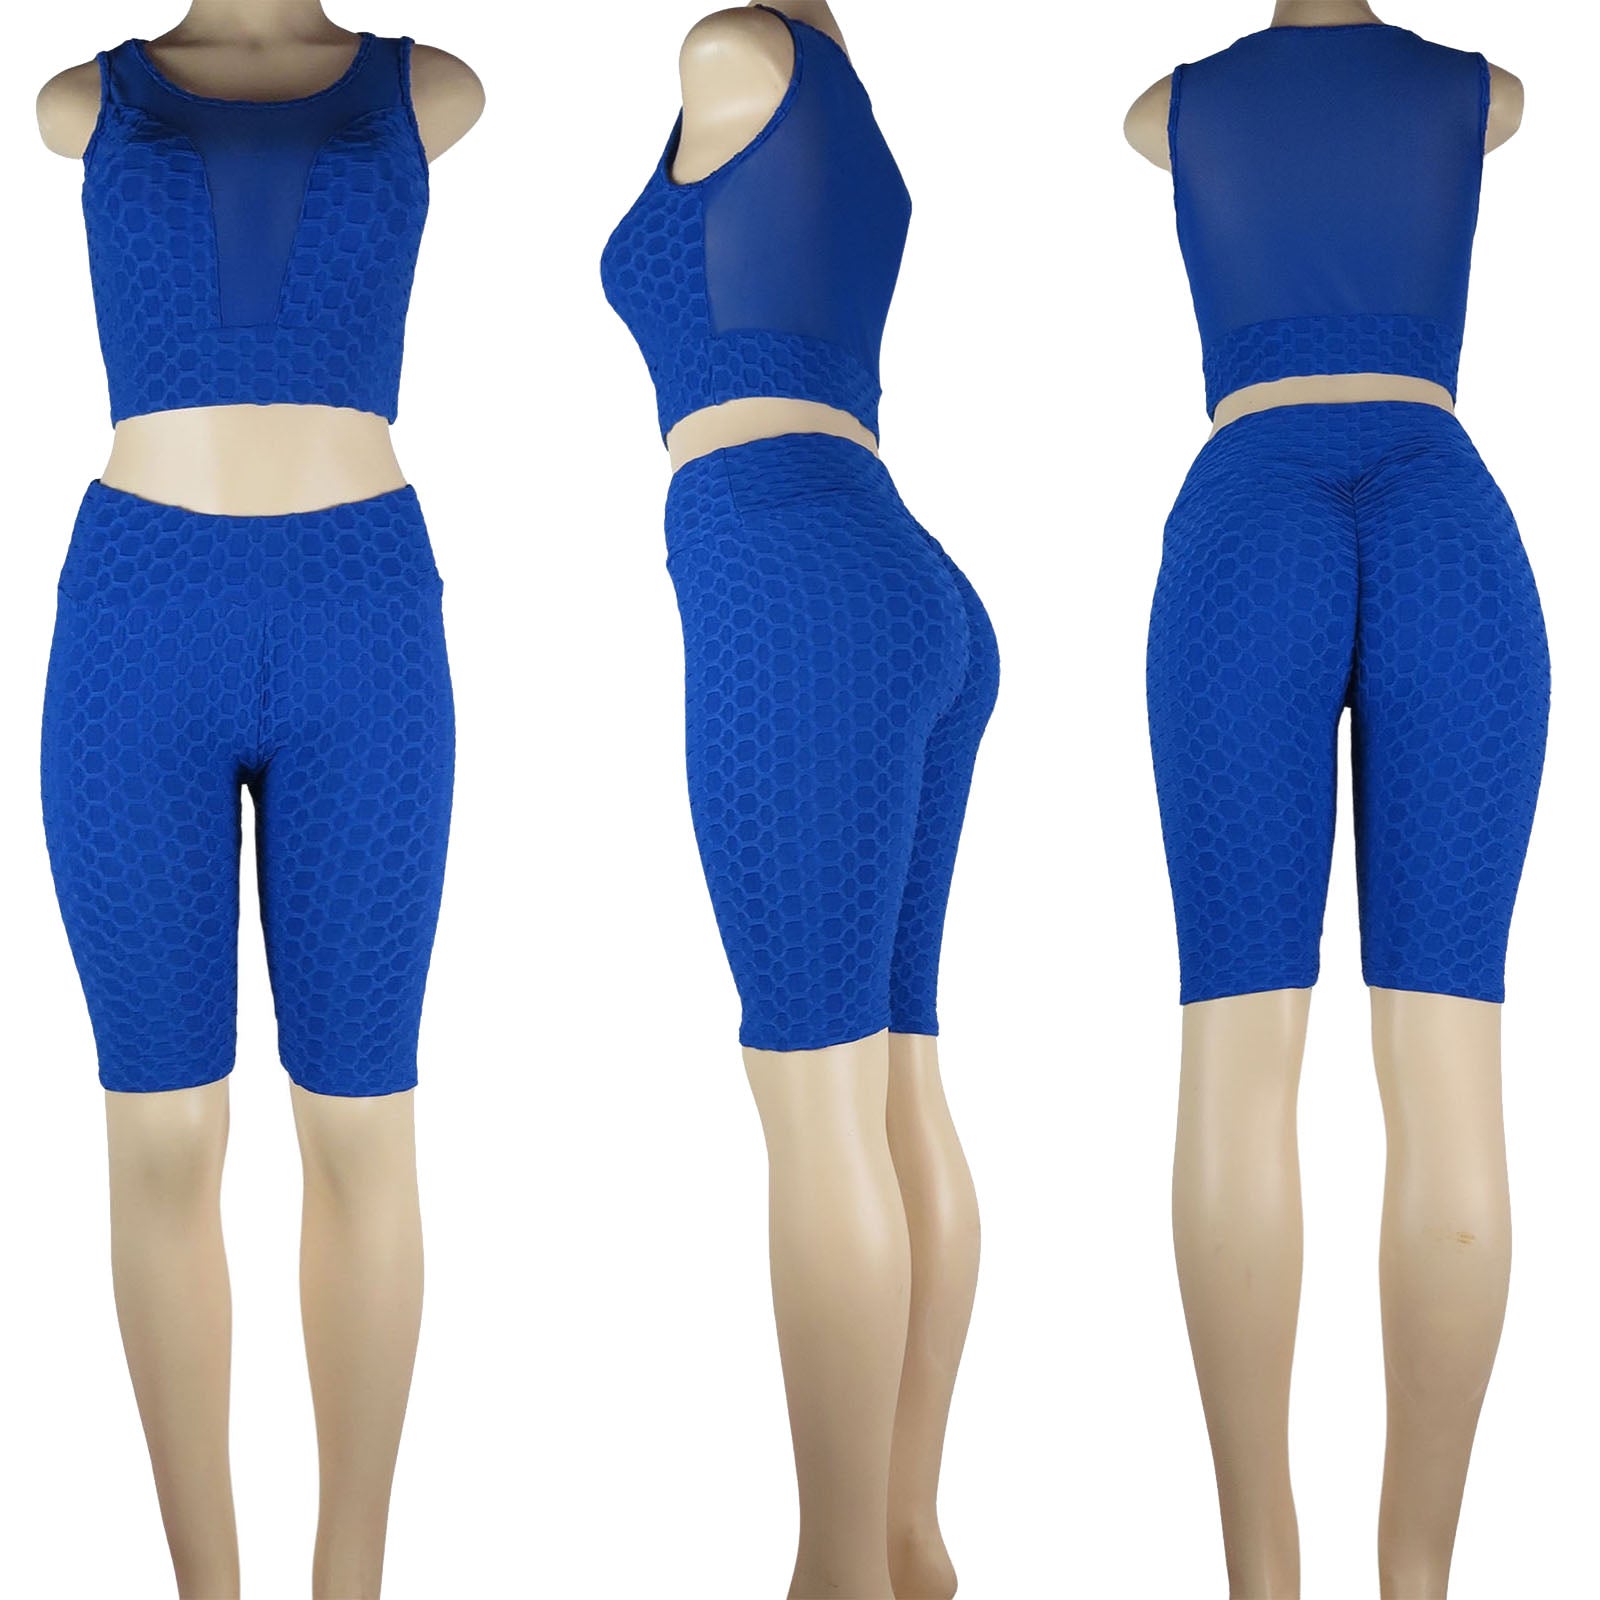 Wholesale TikTok bike shorts set with mesh and scrunch butt bubble design in royal blue